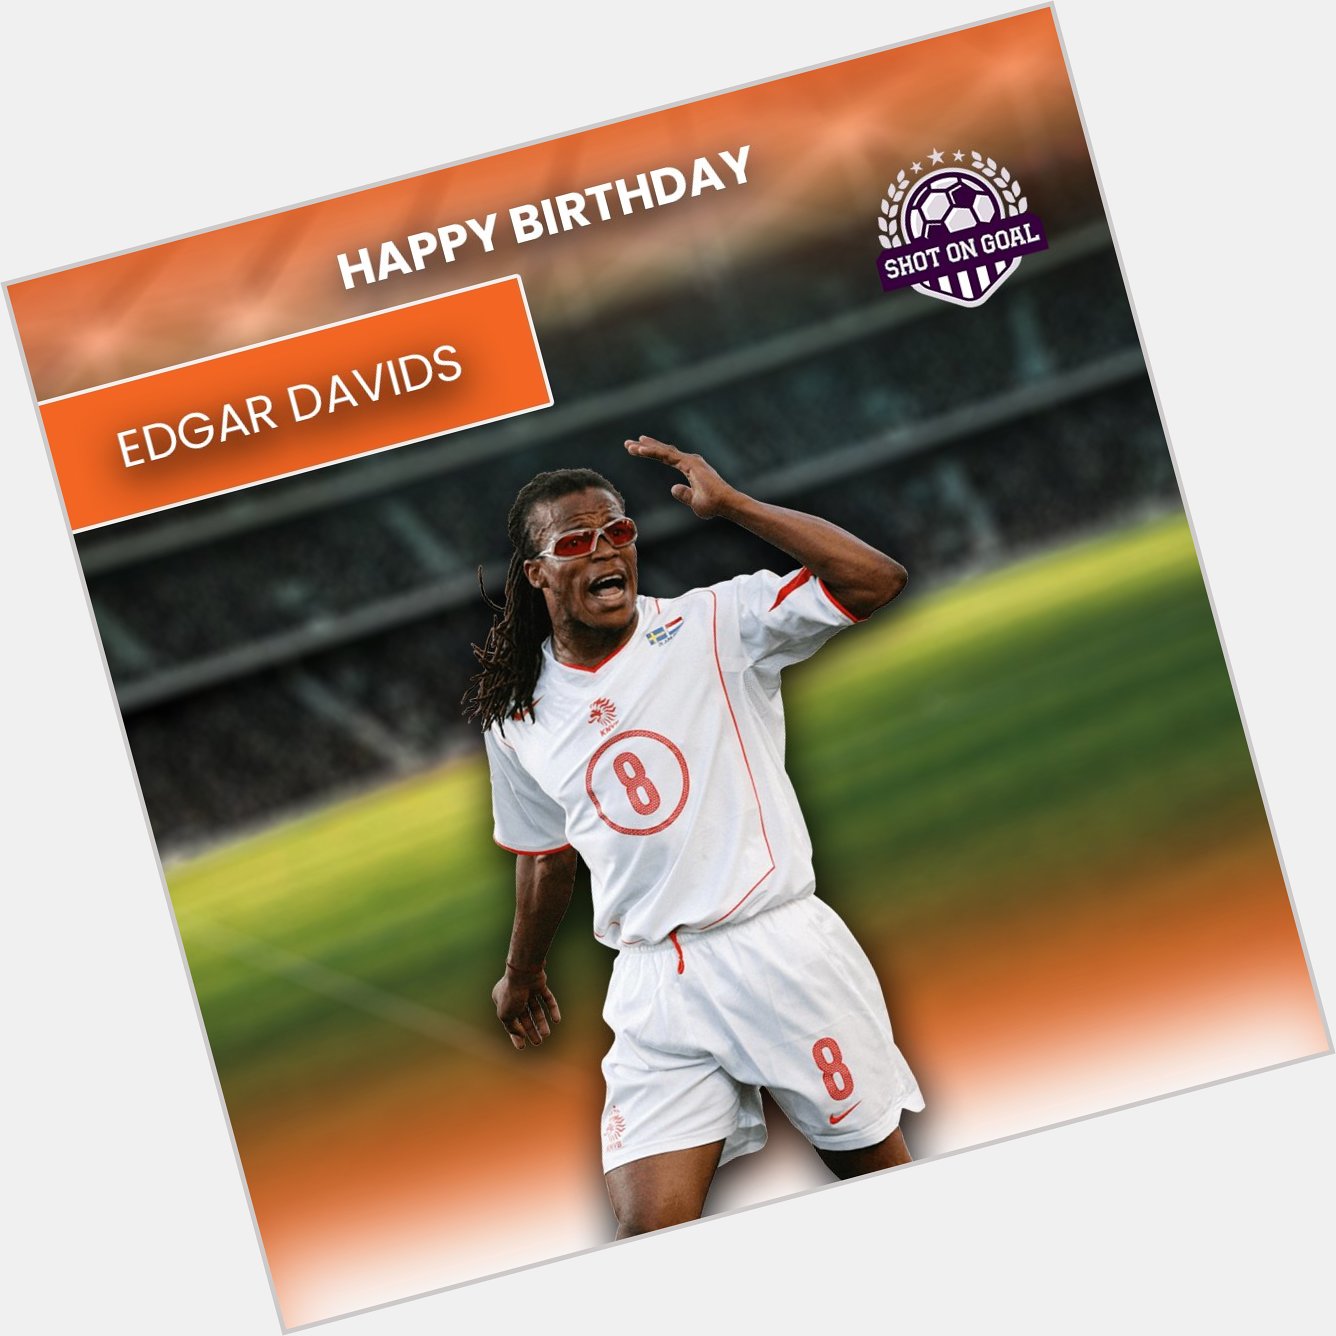  Trophies 16  Clubs 8 Countries 4 Iconic goggles 1 Happy 47th birthday to the one and only Edgar Davids! 